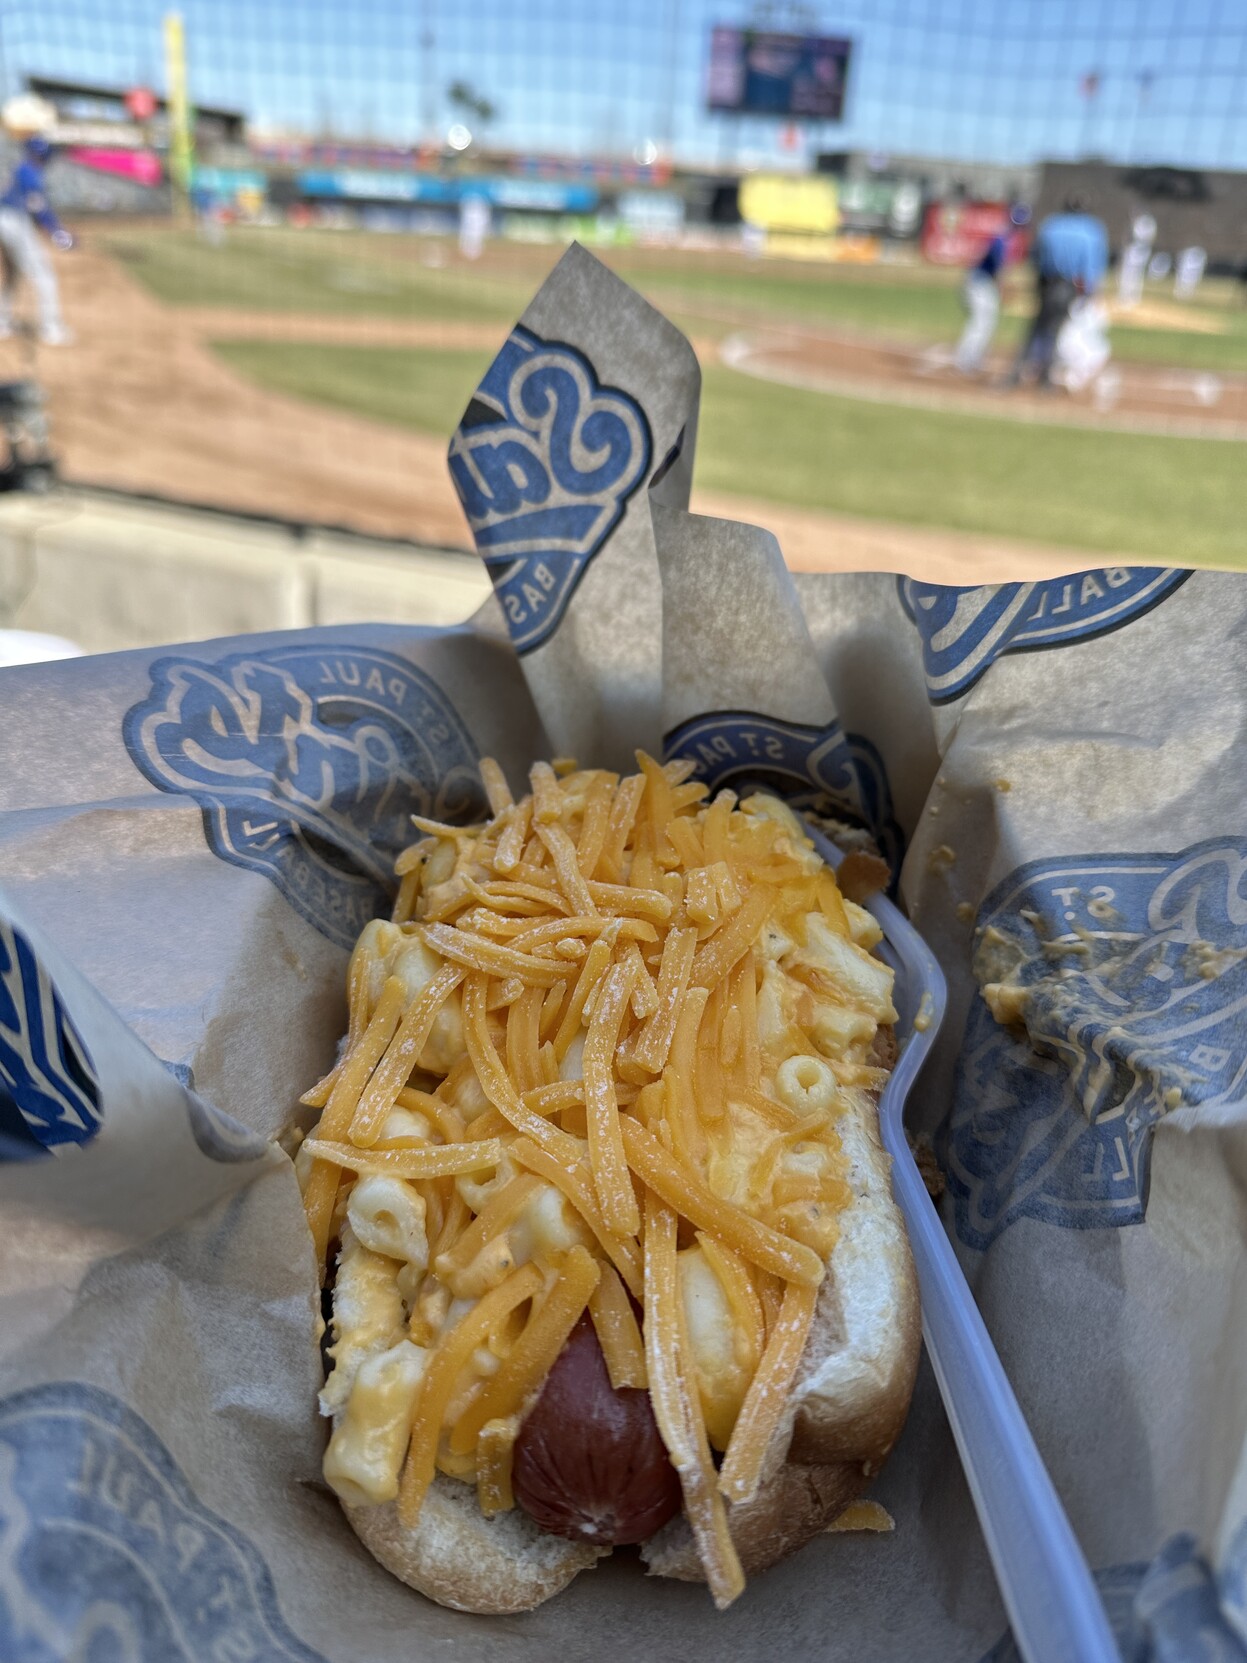 Mac and cheese hot dog with a sunny CHS Field baseball diamond in the background